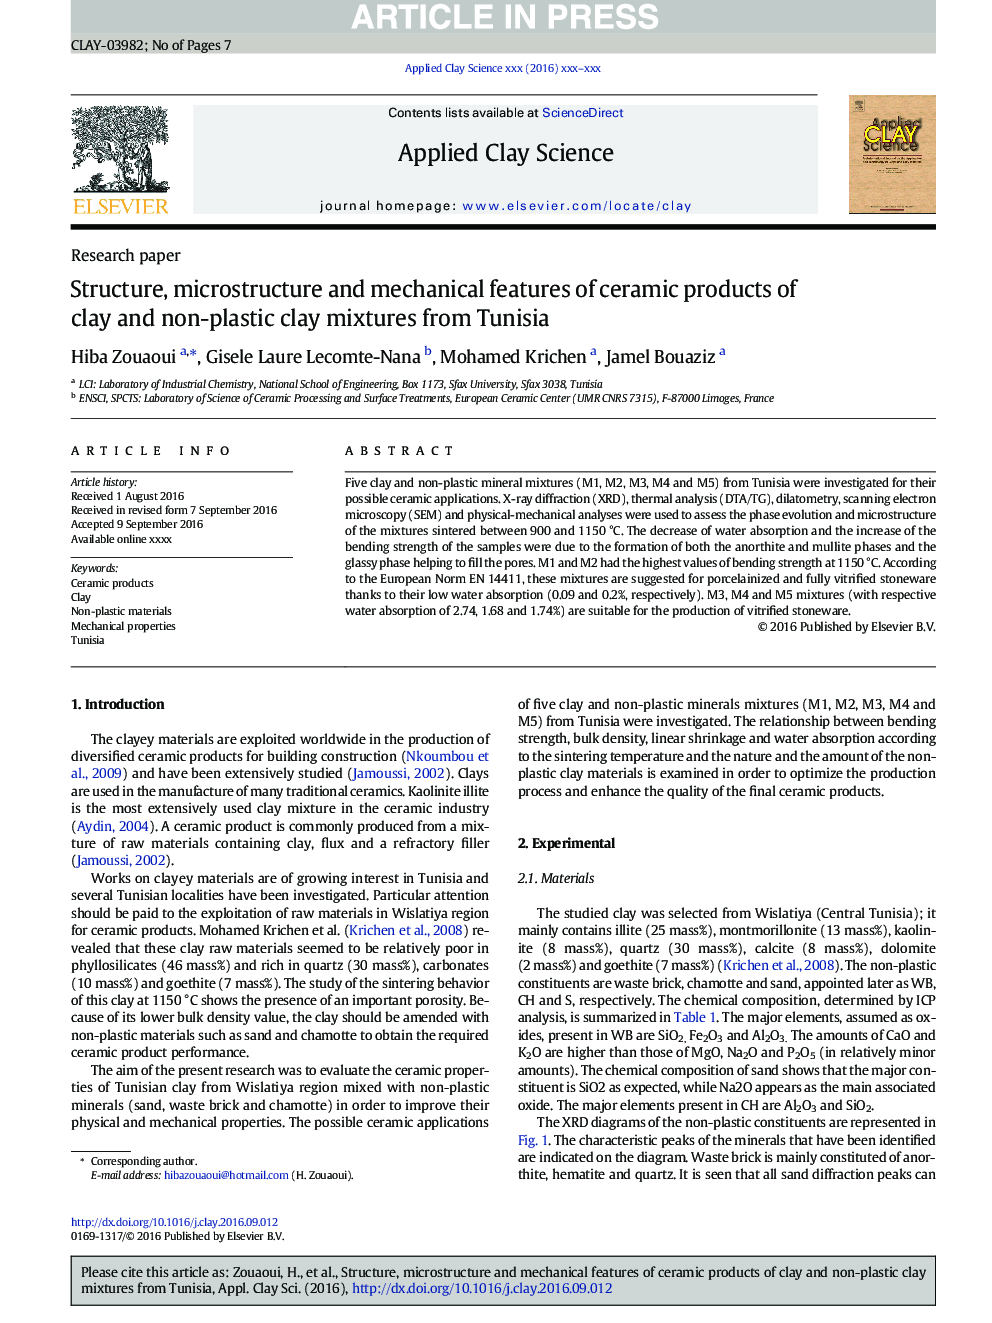 Structure, microstructure and mechanical features of ceramic products of clay and non-plastic clay mixtures from Tunisia